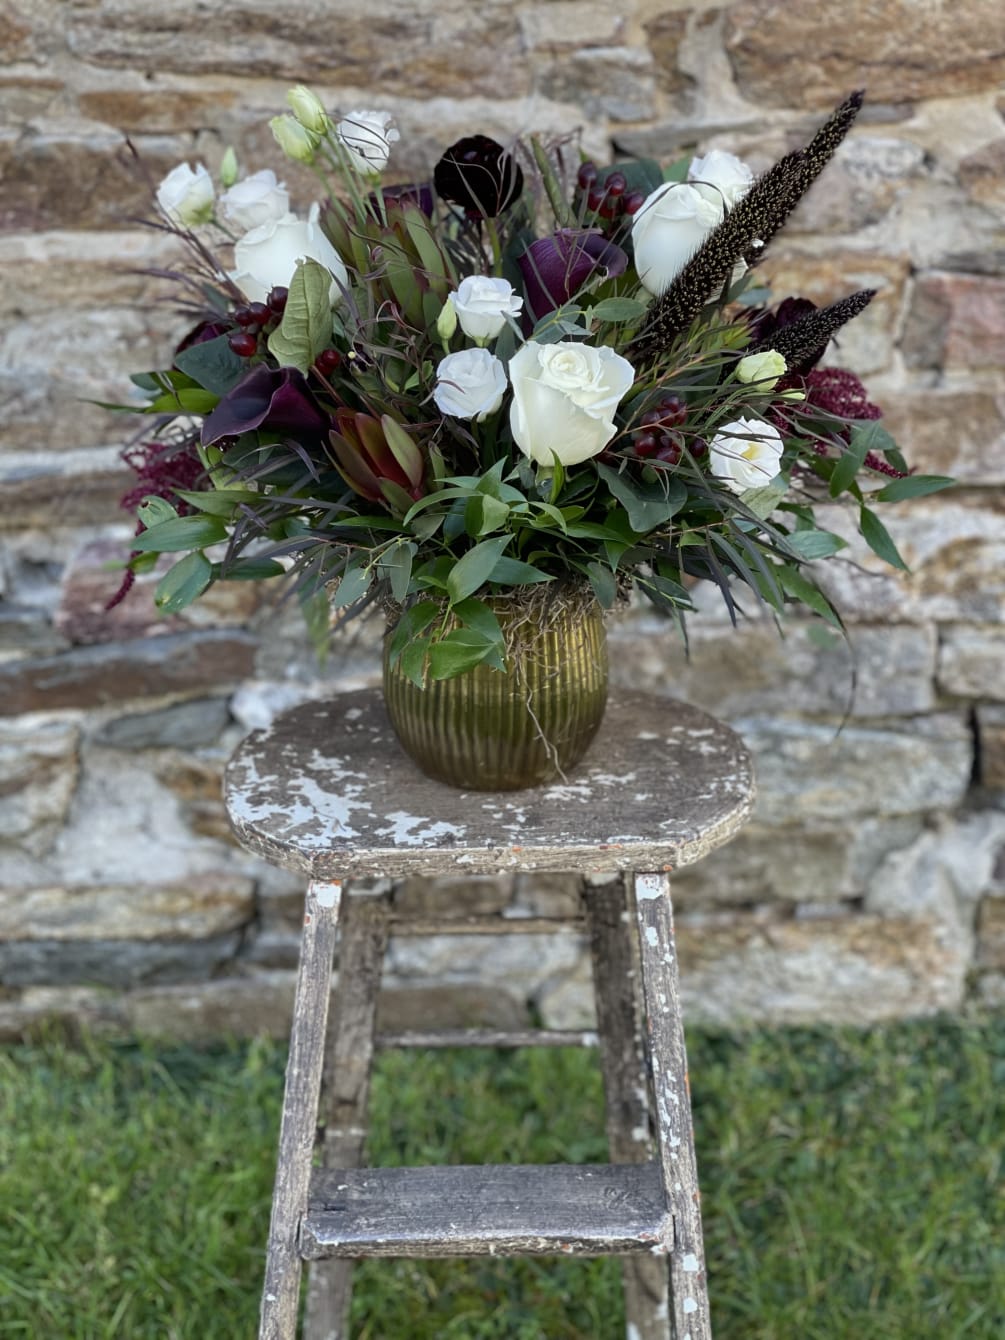 Our Frequent Flower Club features arrangements created with our freshest seasonal blooms.